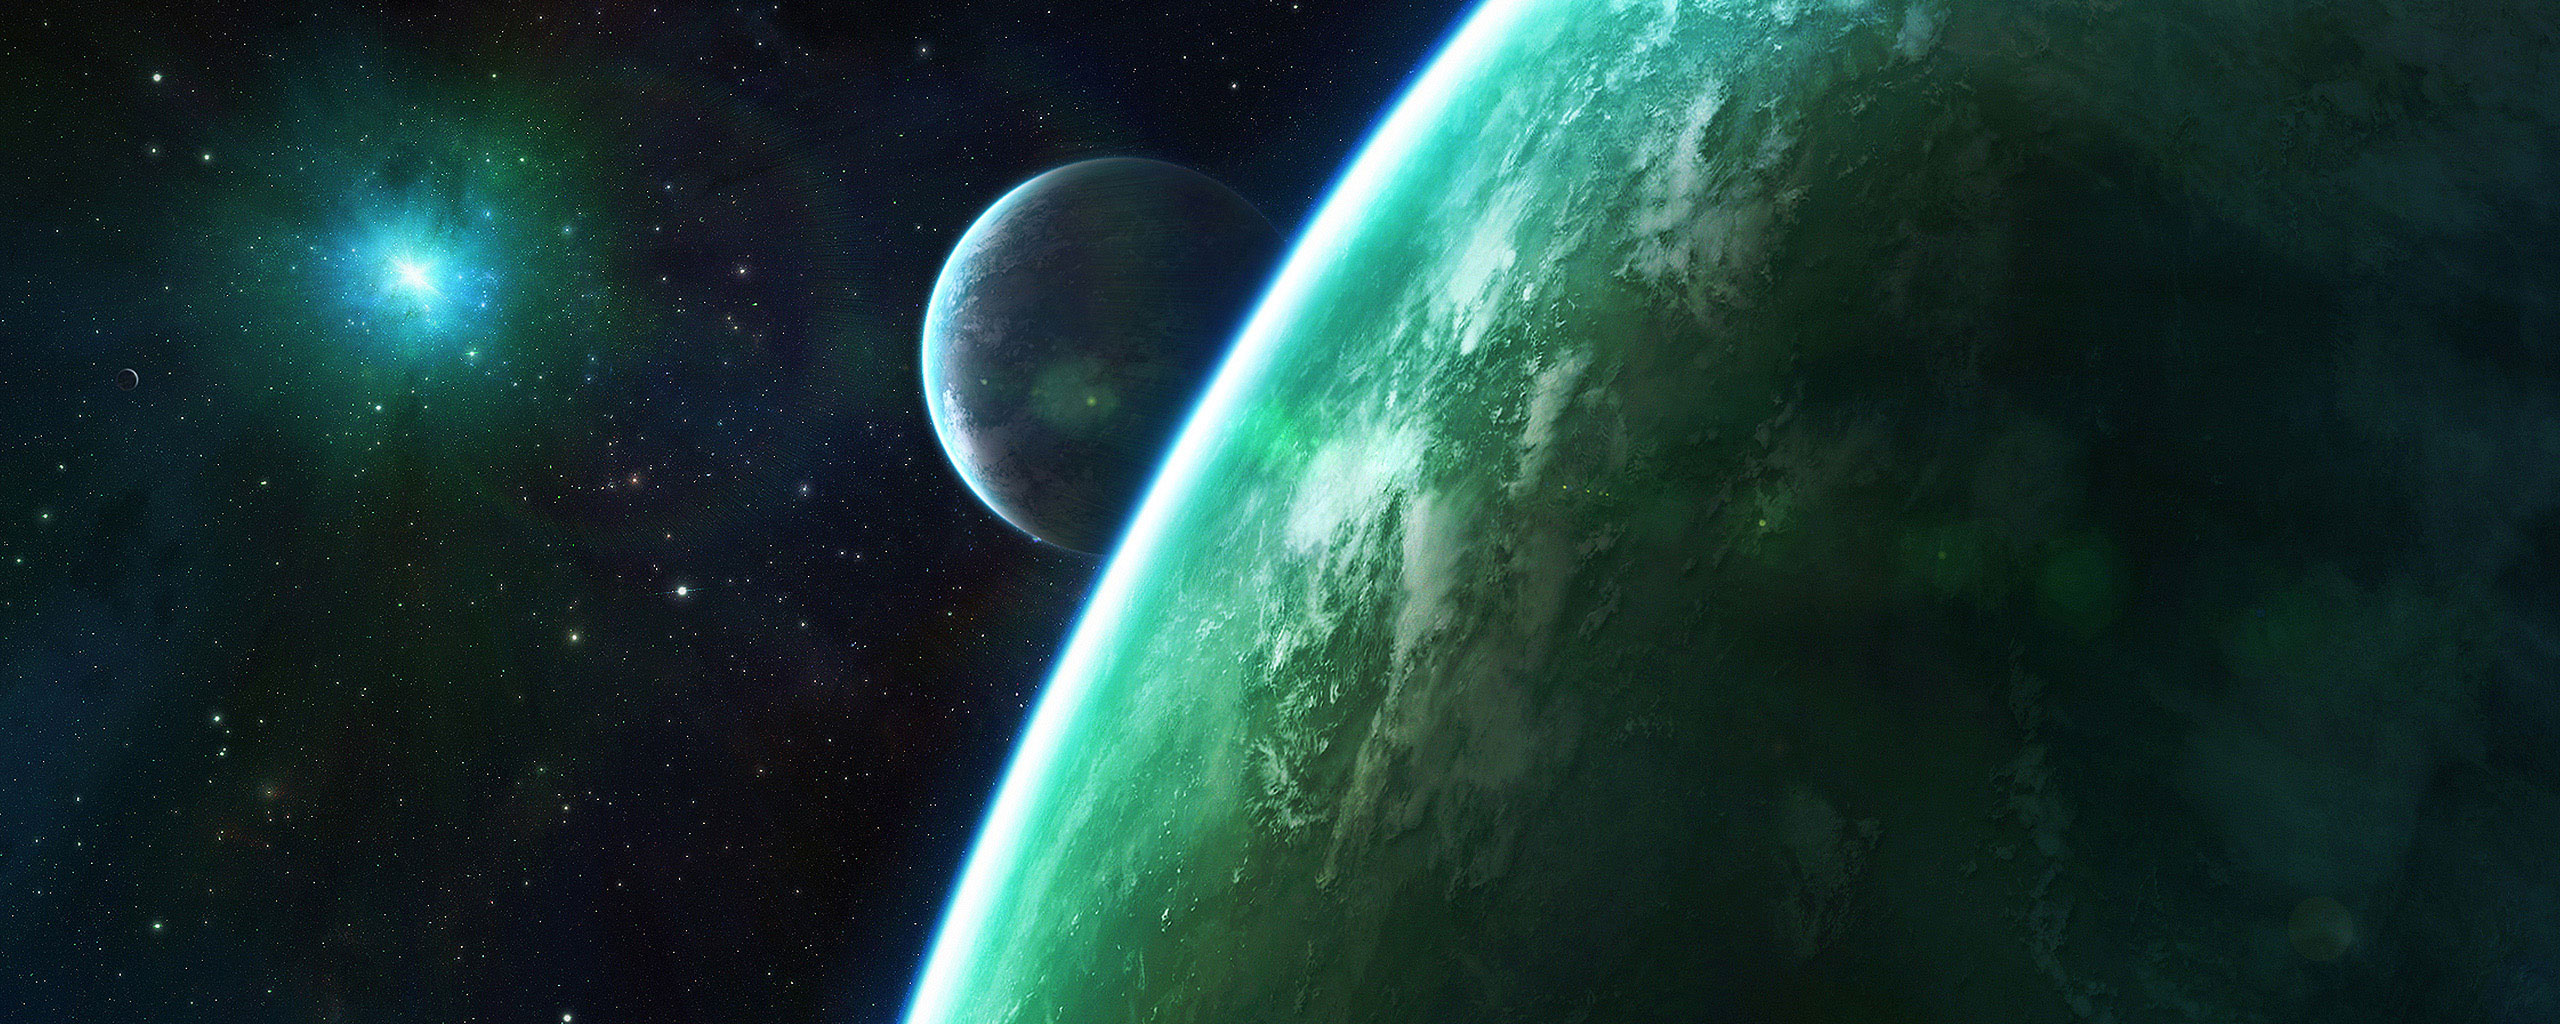 Sci Fi Planets 2560x1024